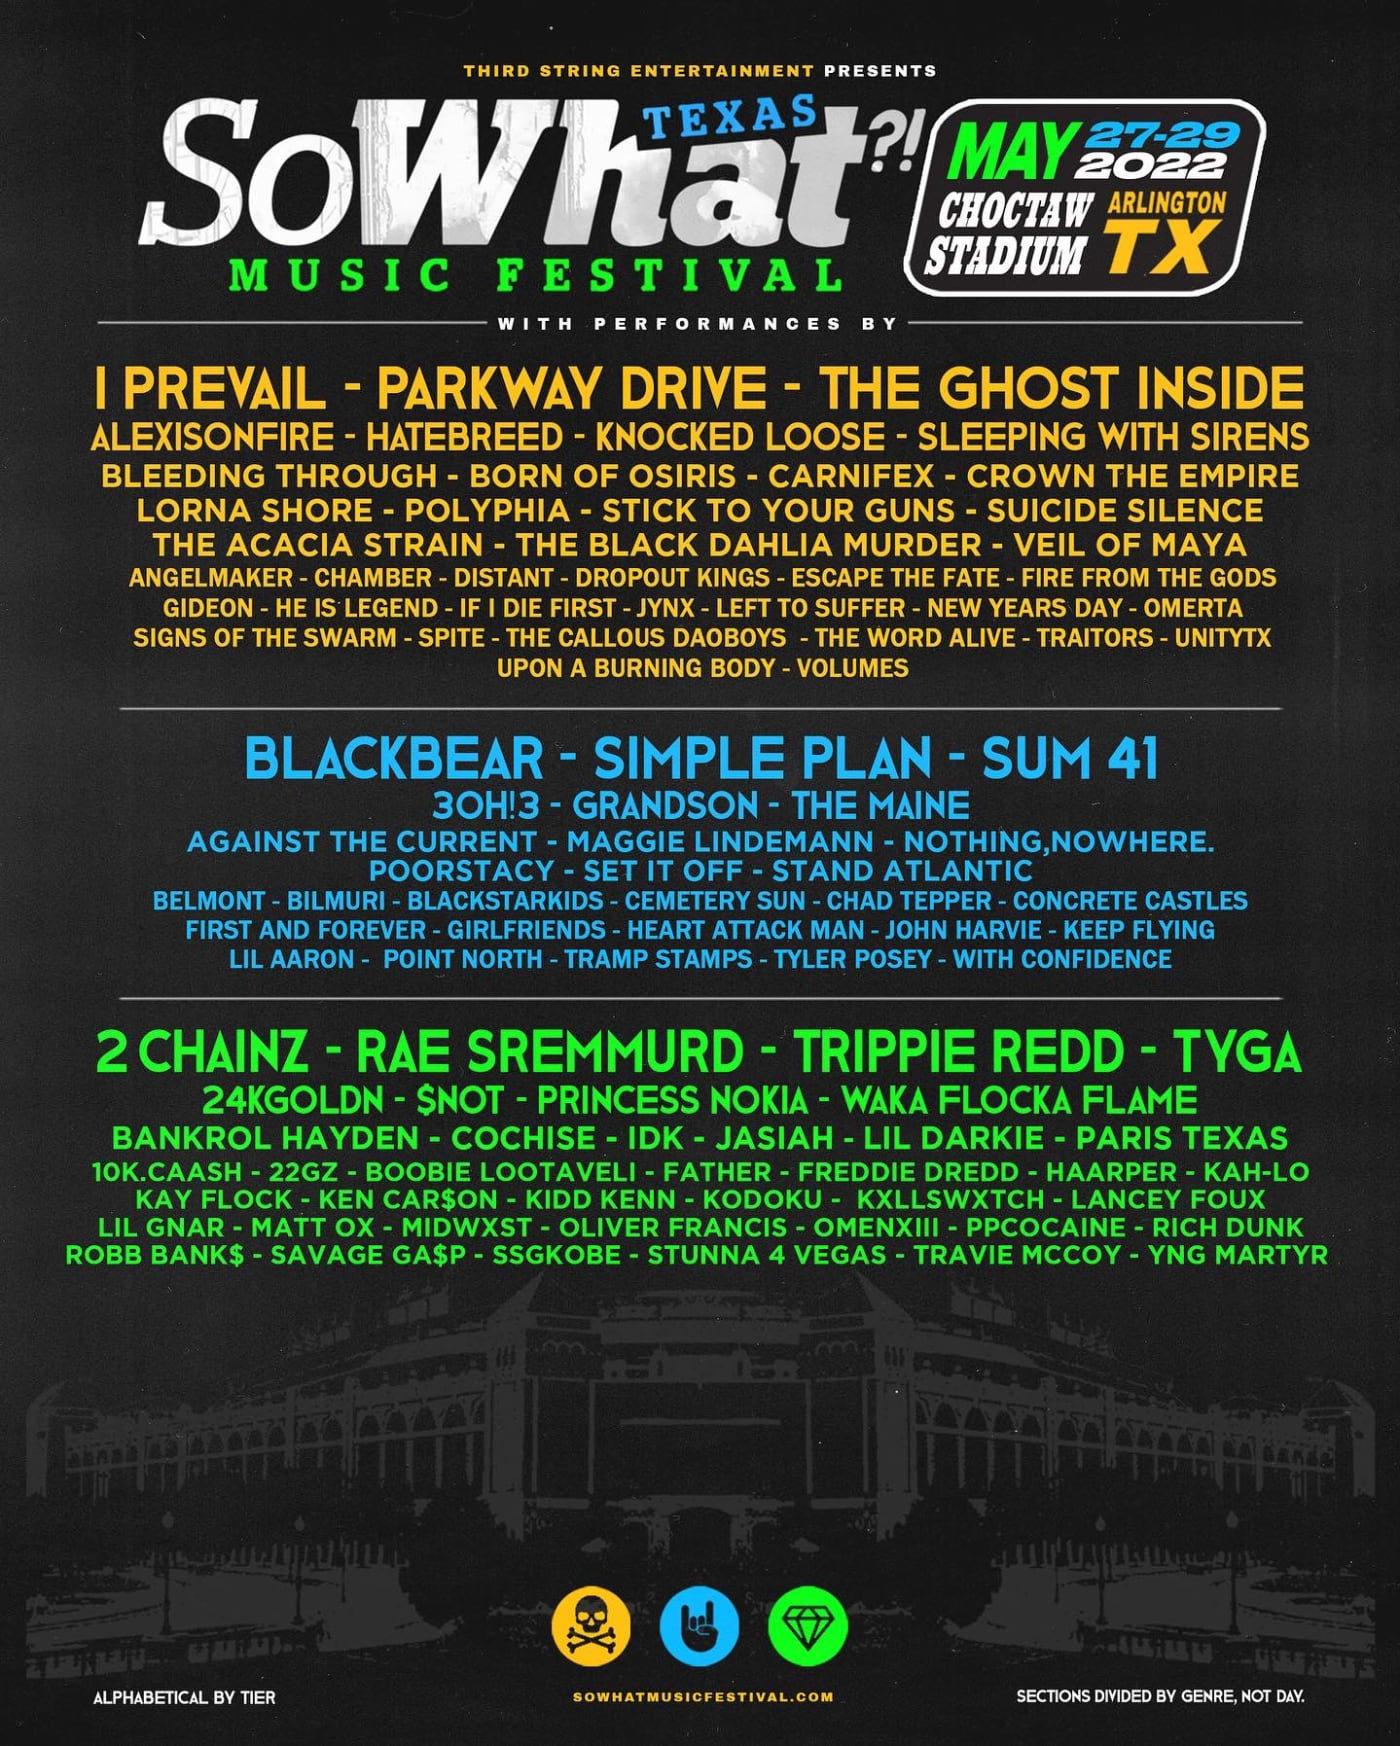 A flyer for So What festival is pictured